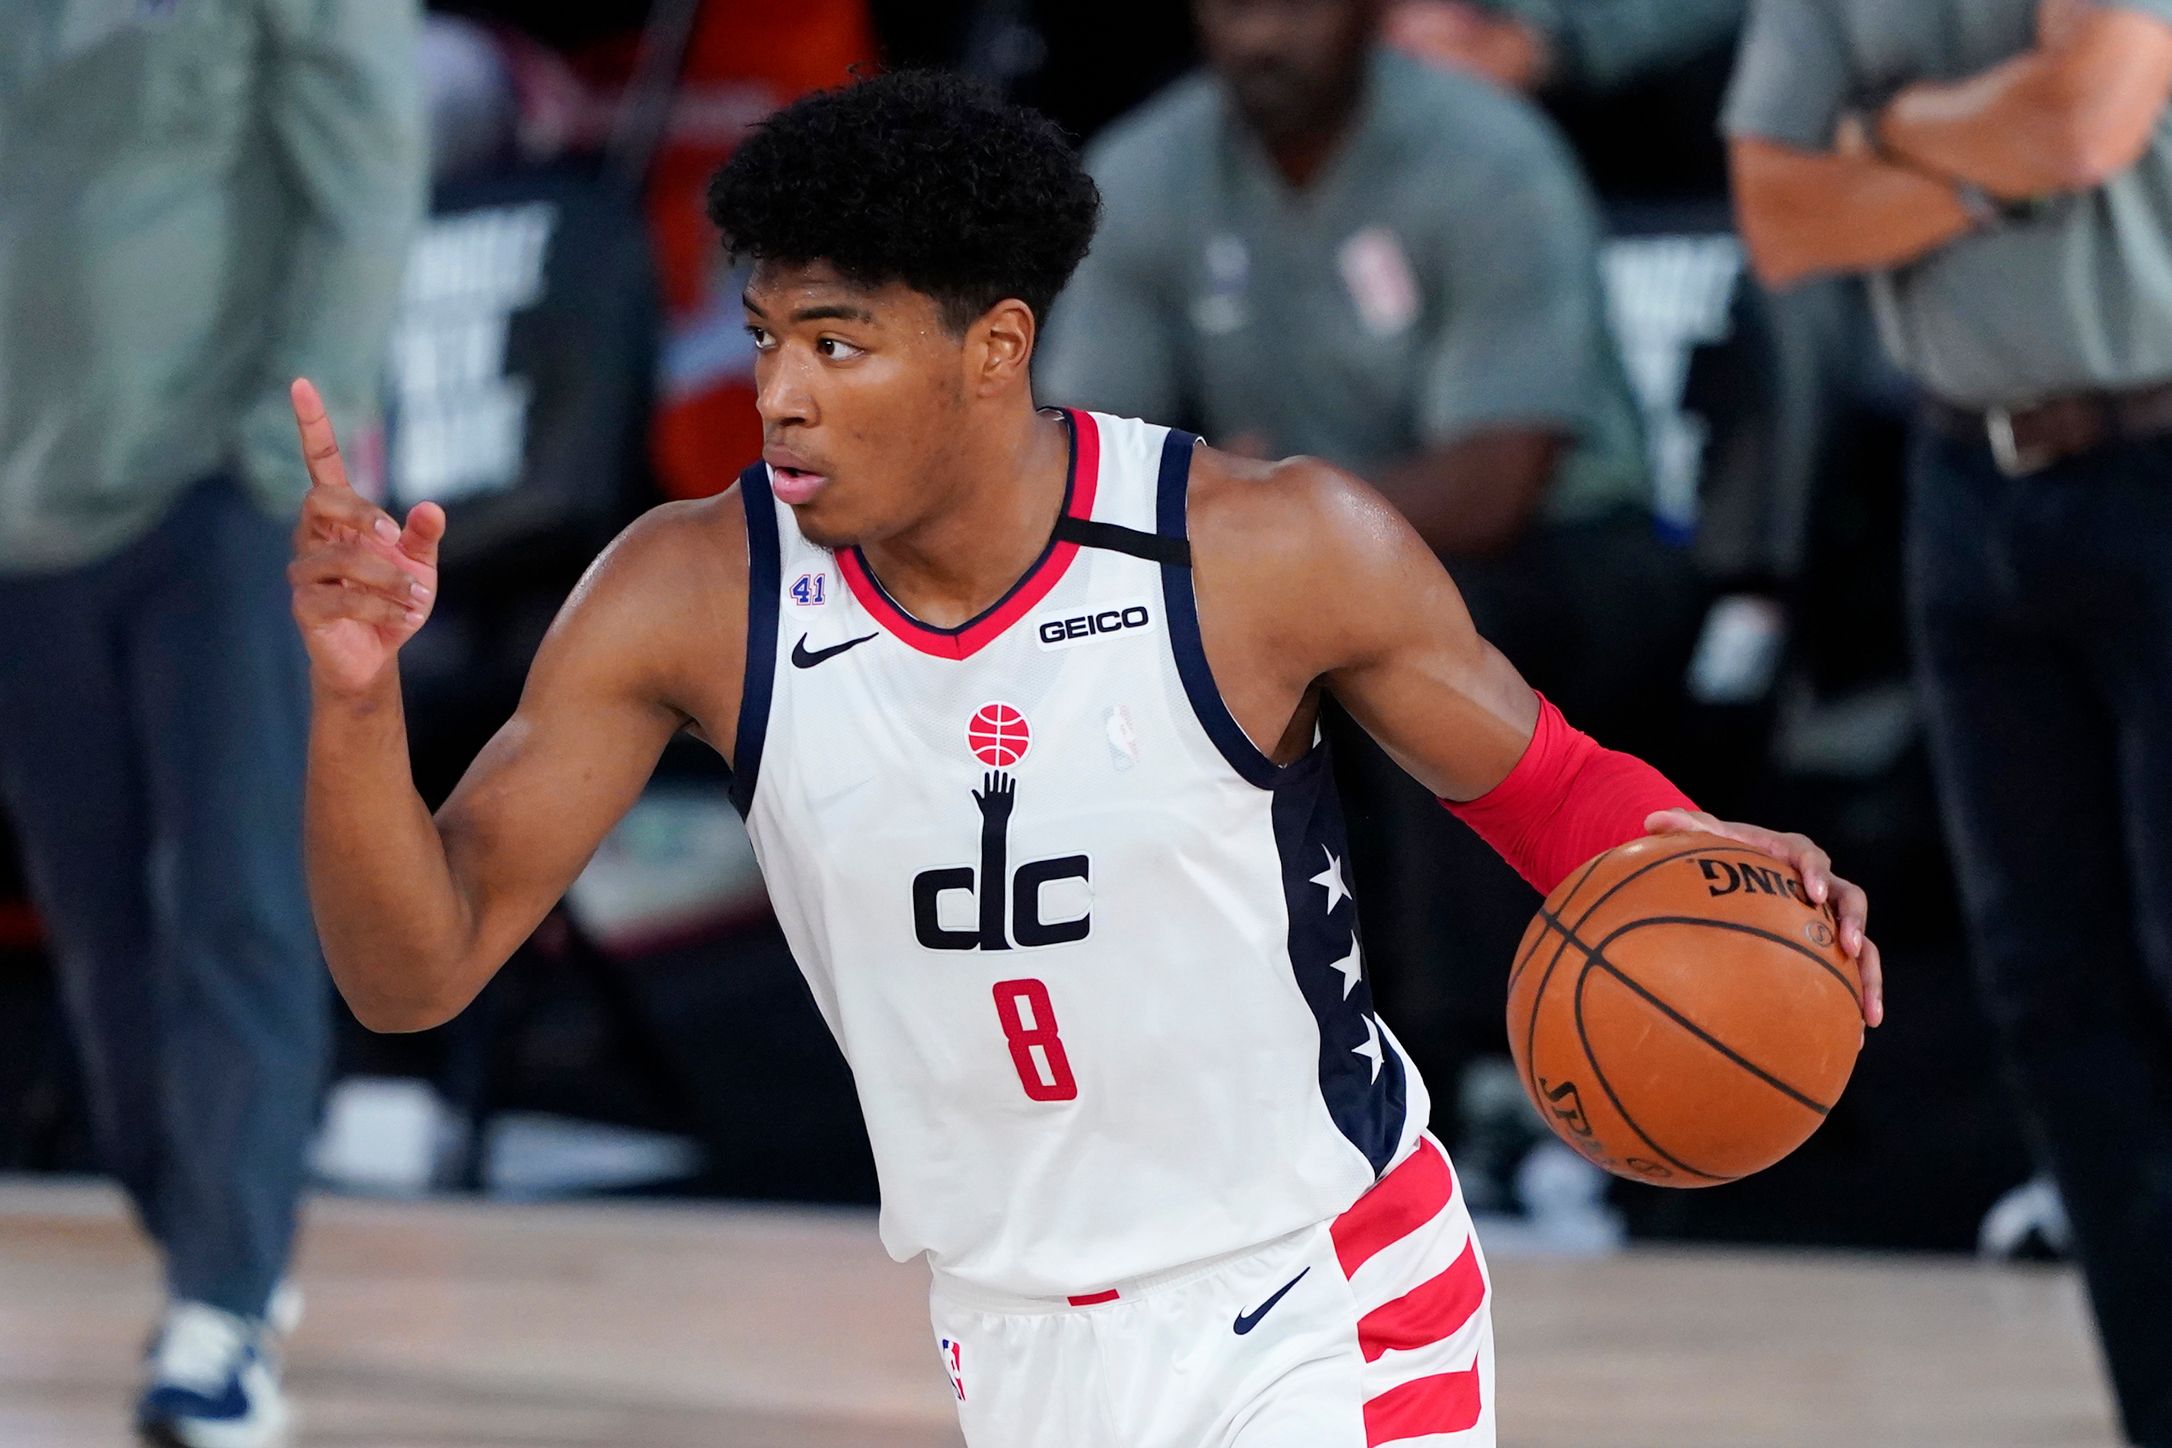 Rui Hachimura making plays for the Wizards